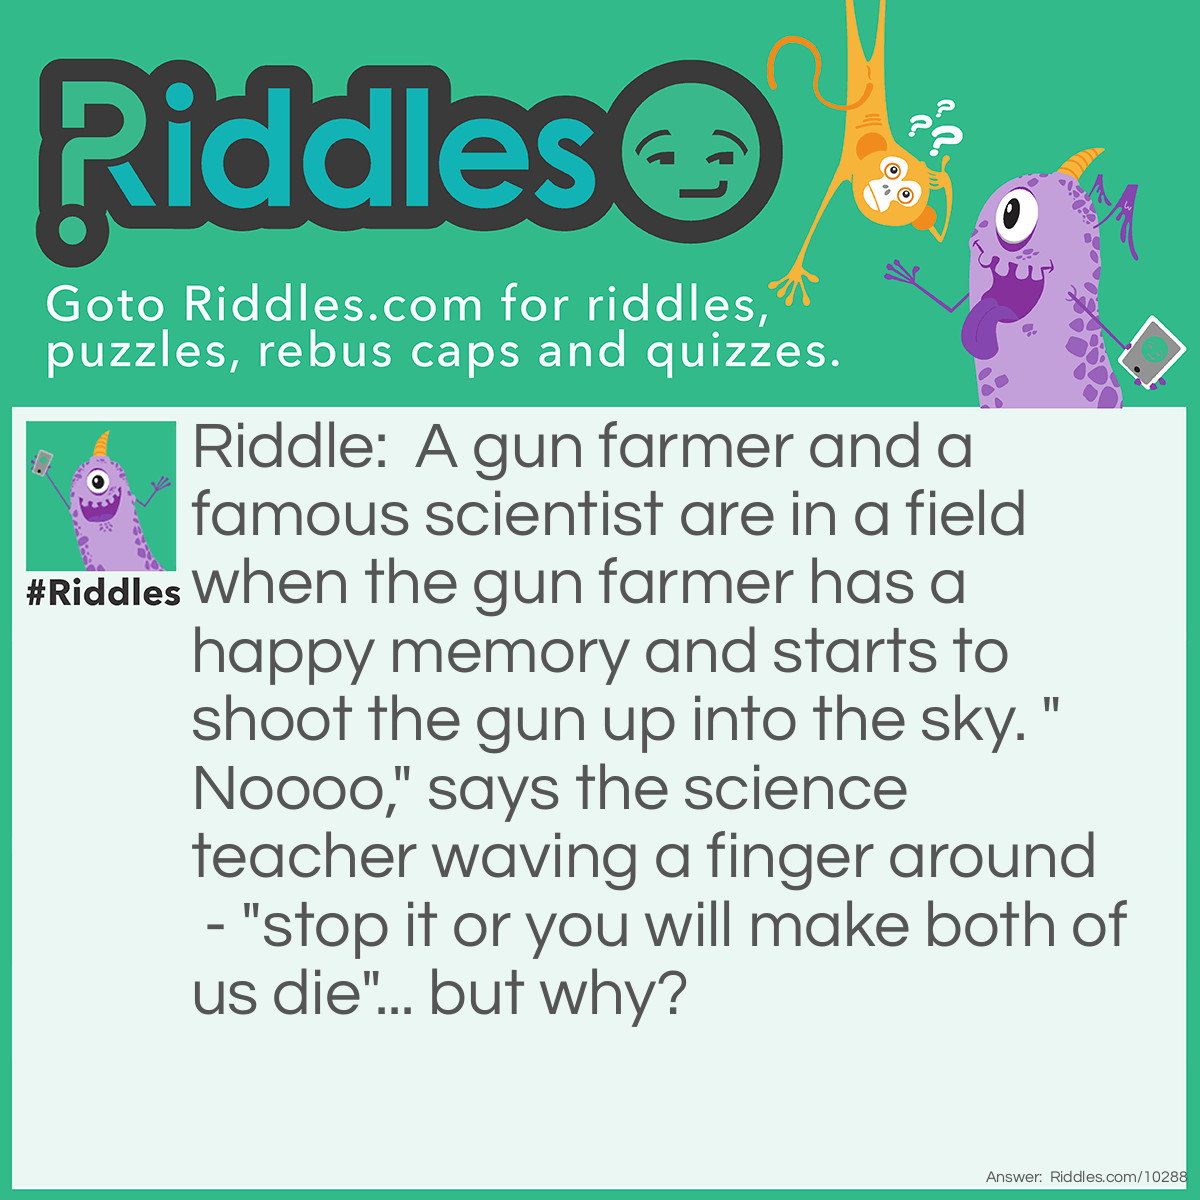 Riddle: A gun farmer and a famous scientist are in a field when the gun farmer has a happy memory and starts to shoot the gun up into the sky. "Noooo," says the science teacher waving a finger around - "stop it or you will make both of us die"... but why? Answer: They are standing underneath a giant glass cage that is also full of sharks!